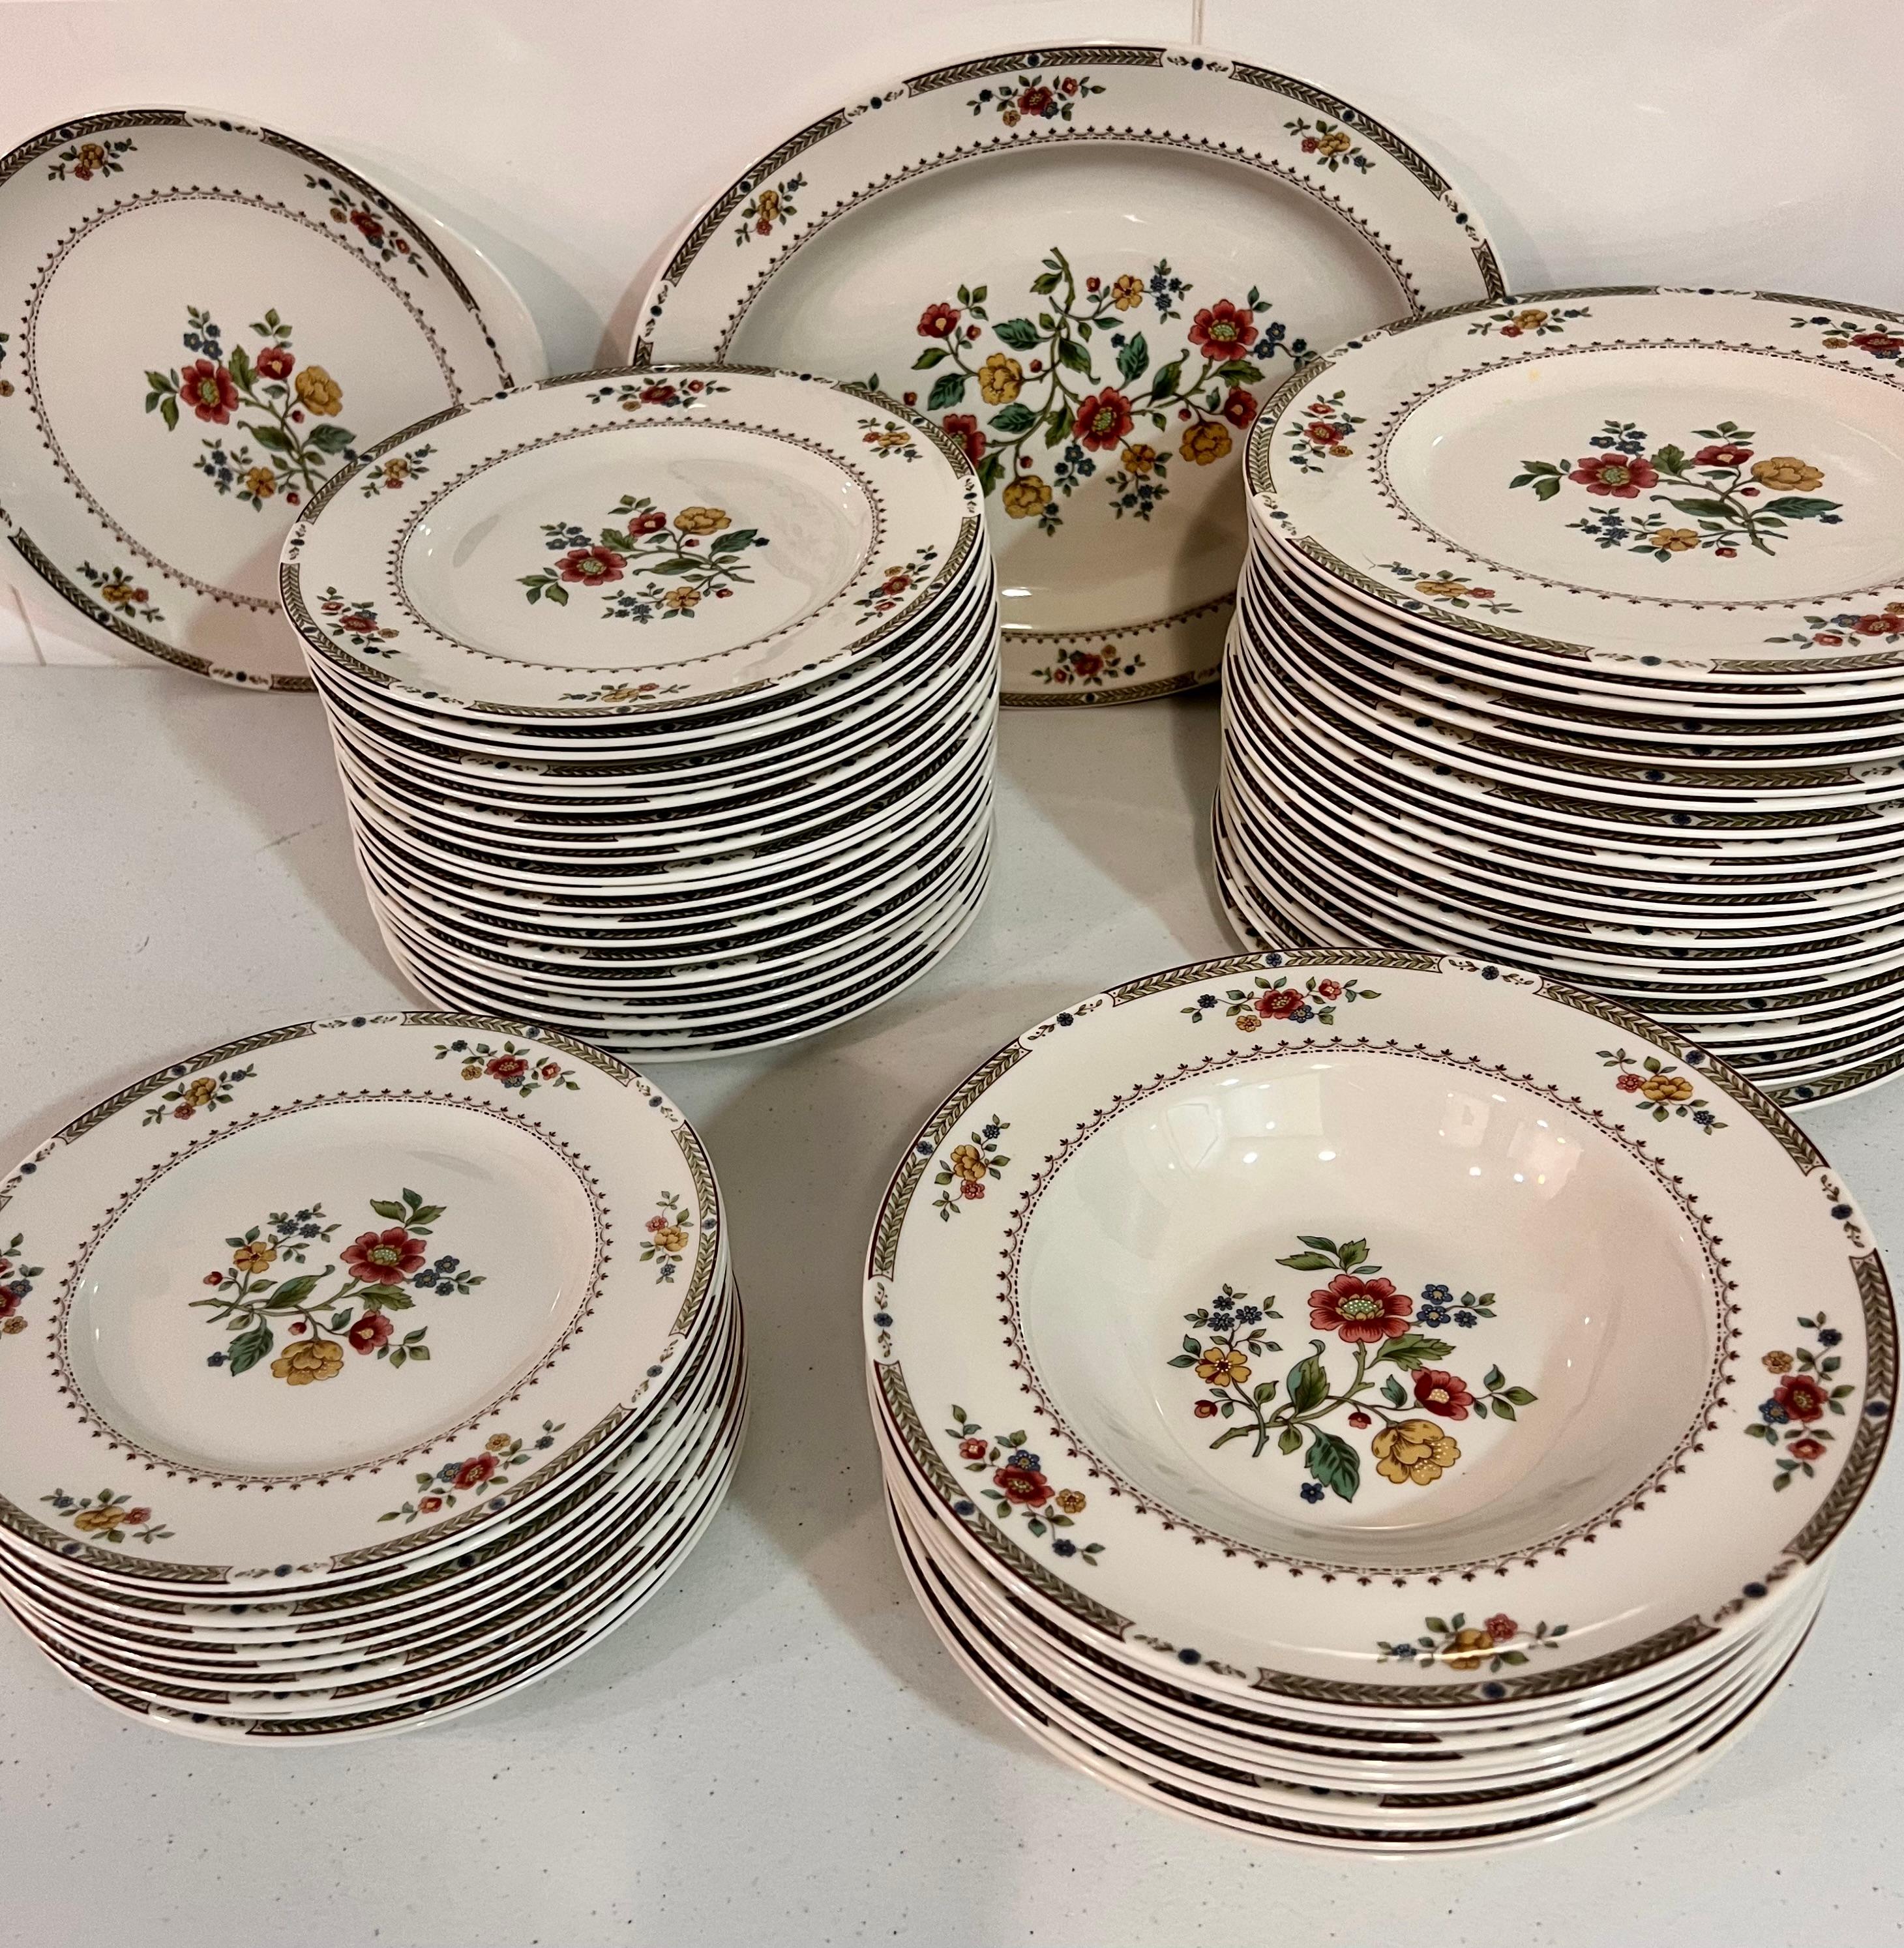 Dinner plate replacement flatware and dinnerware royal Doulton Kingswood Floral design

Measure: Width: 10 5/8 in
Hand wash

Request info for flatware and diner ware 
we sell them individually or in sets
We have a full collection that